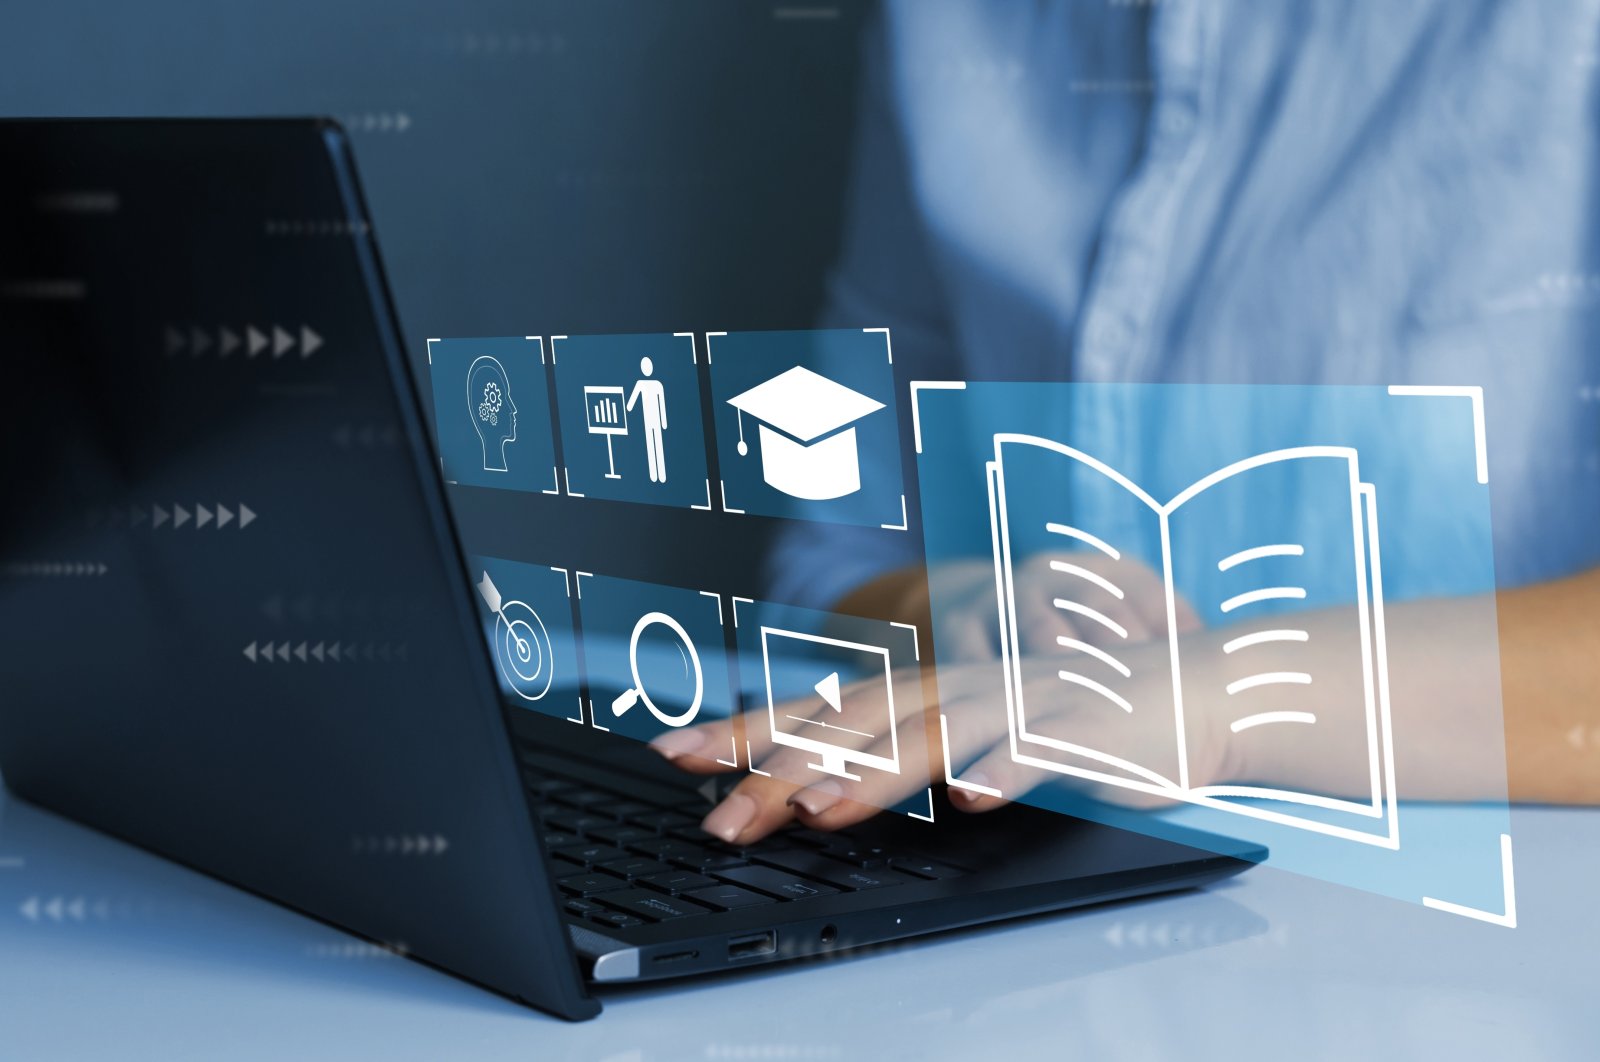 The Council of Higher Education (YÖK) has announced that the 2022/2023 spring term would start with online classes on Feb. 20, with the option to reevaluate the hybrid option at the beginning of April. (Shutterstock Photo)